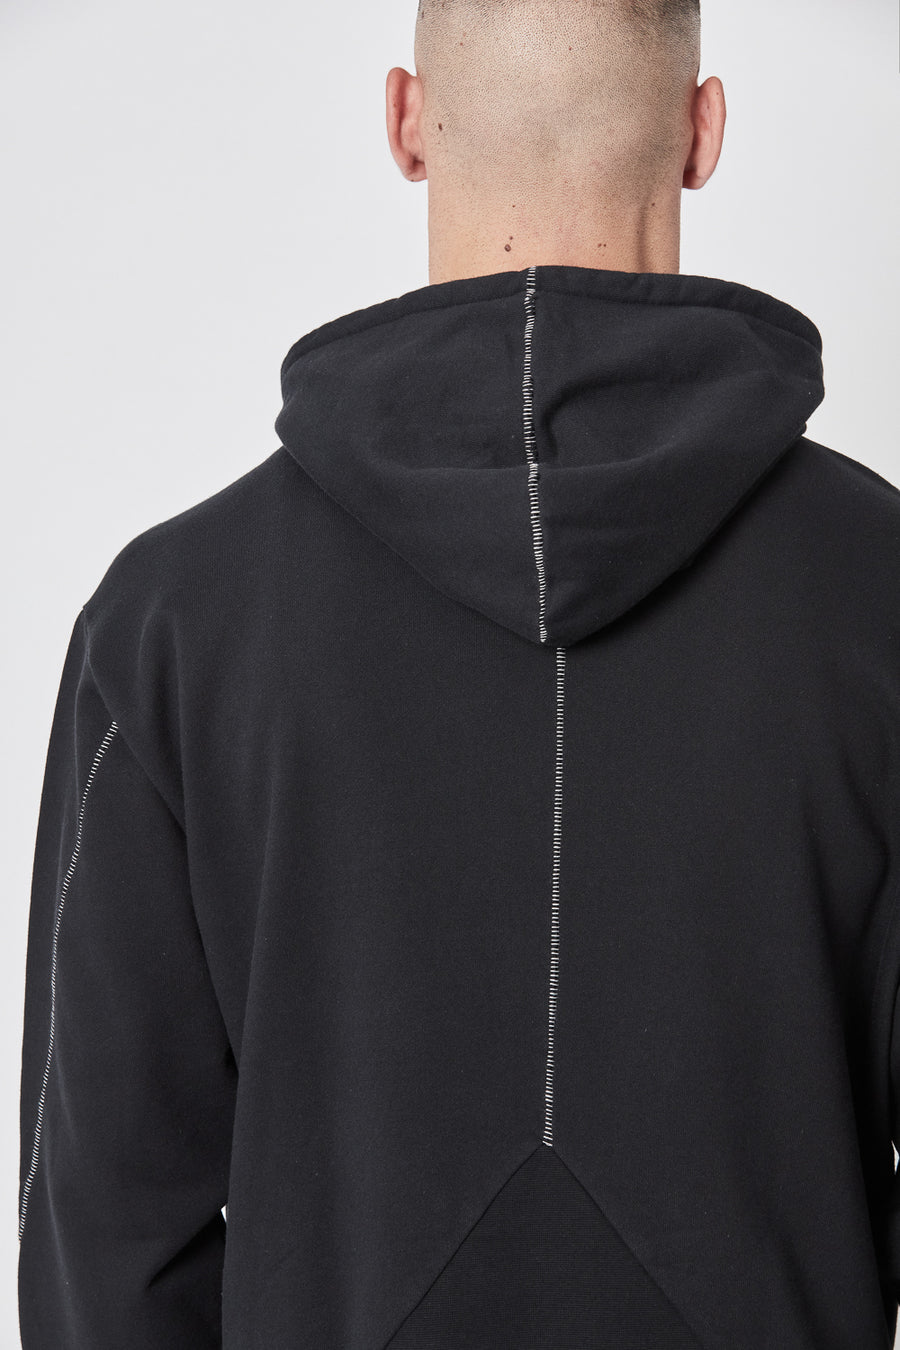 Buy the Thom Krom M S 156 Hoodie in Black at Intro. Spend £50 for free UK delivery. Official stockists. We ship worldwide.